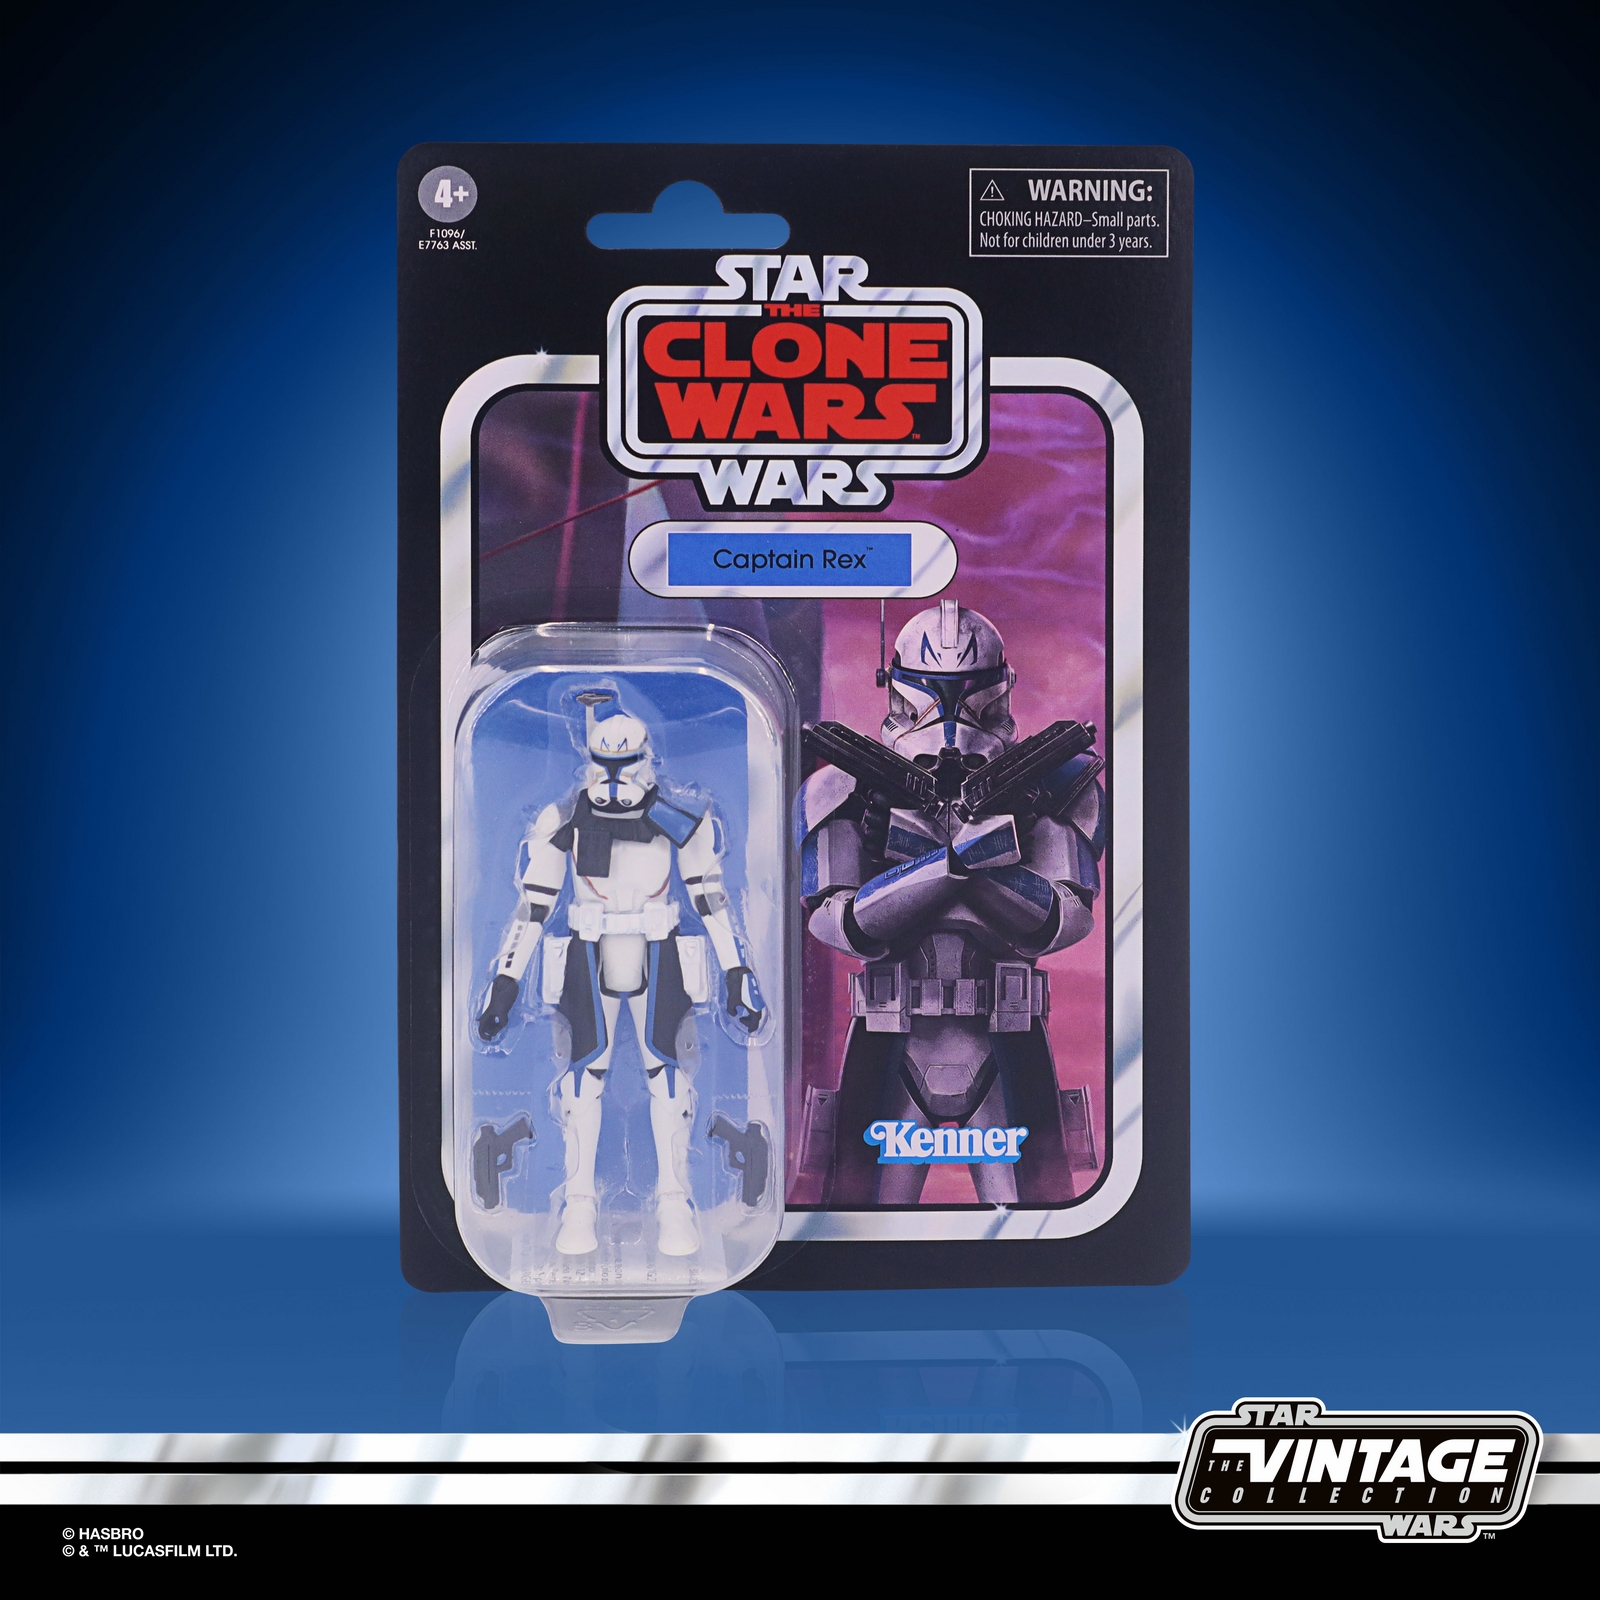 STAR WARS THE VINTAGE COLLECTION 3.75-INCH CAPTAIN REX Figure - in pck.jpg